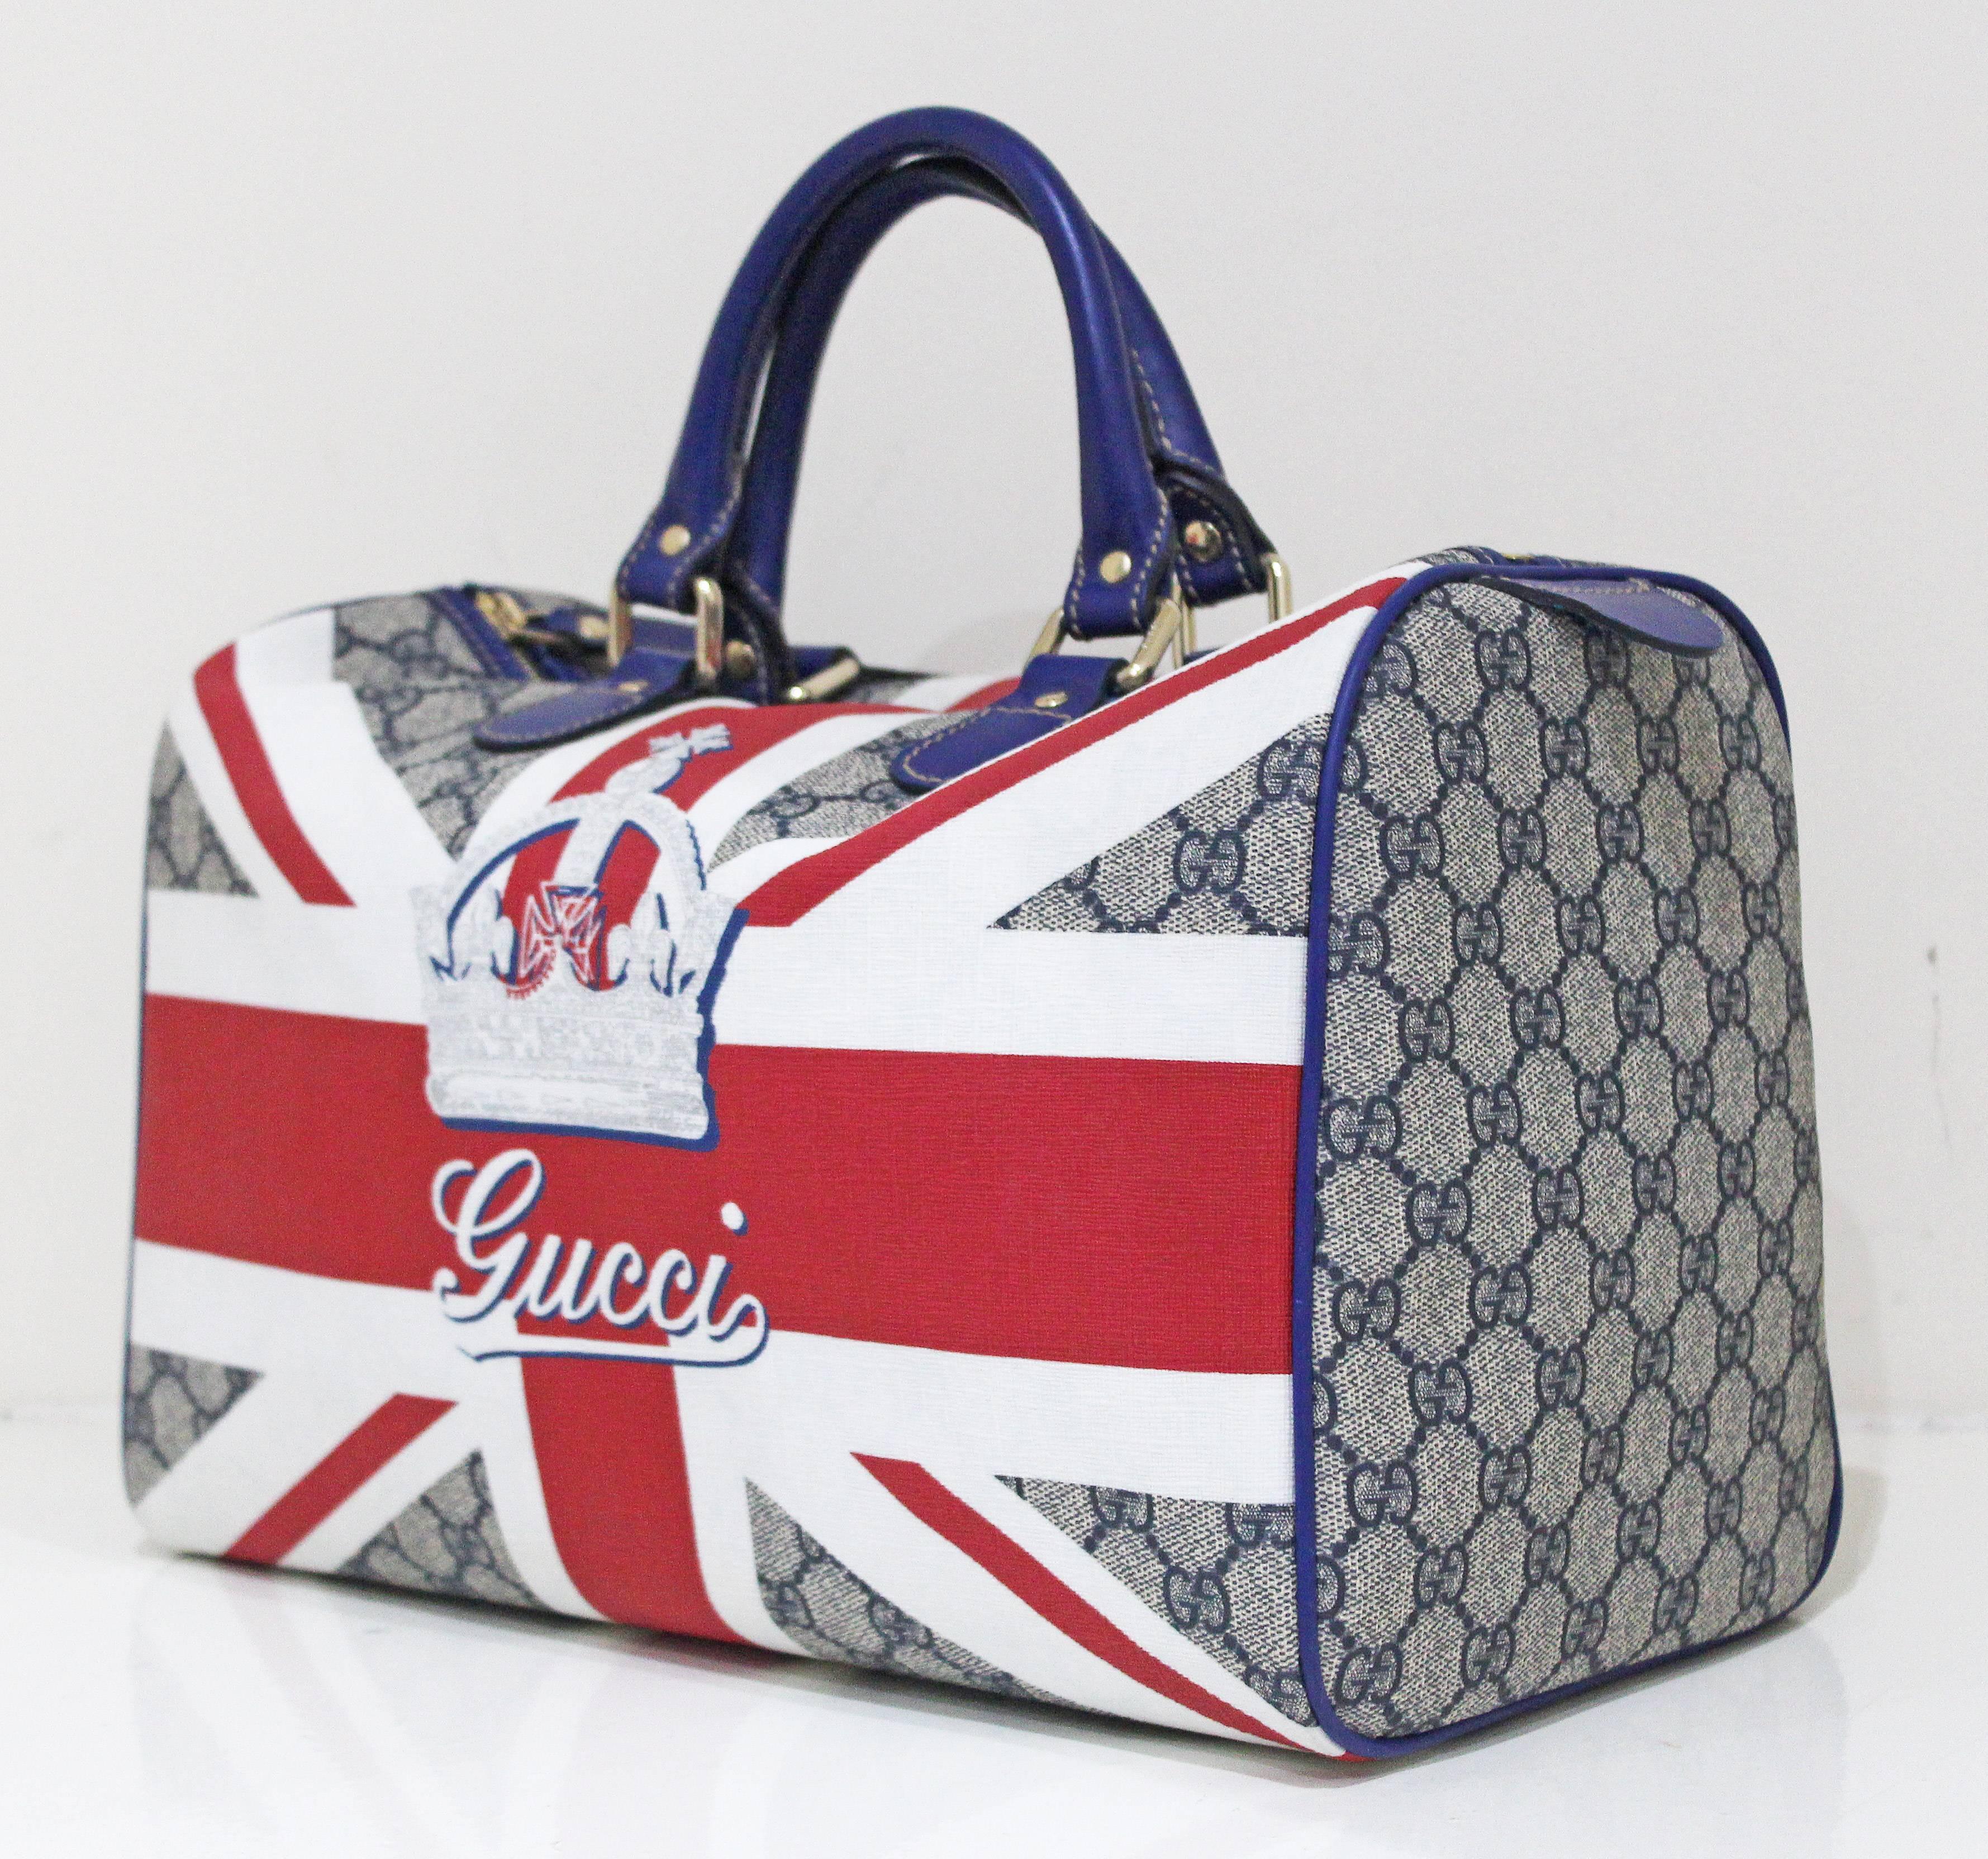 A Limited Edition Gucci union jacket 'Sloaney' bag from 2009. The bag was designed by Frida Giannini to celebrate the opening of the newly renovated Gucci flagship boutique on London’s Sloane Street. The bag features the Union Jack Flag on top of